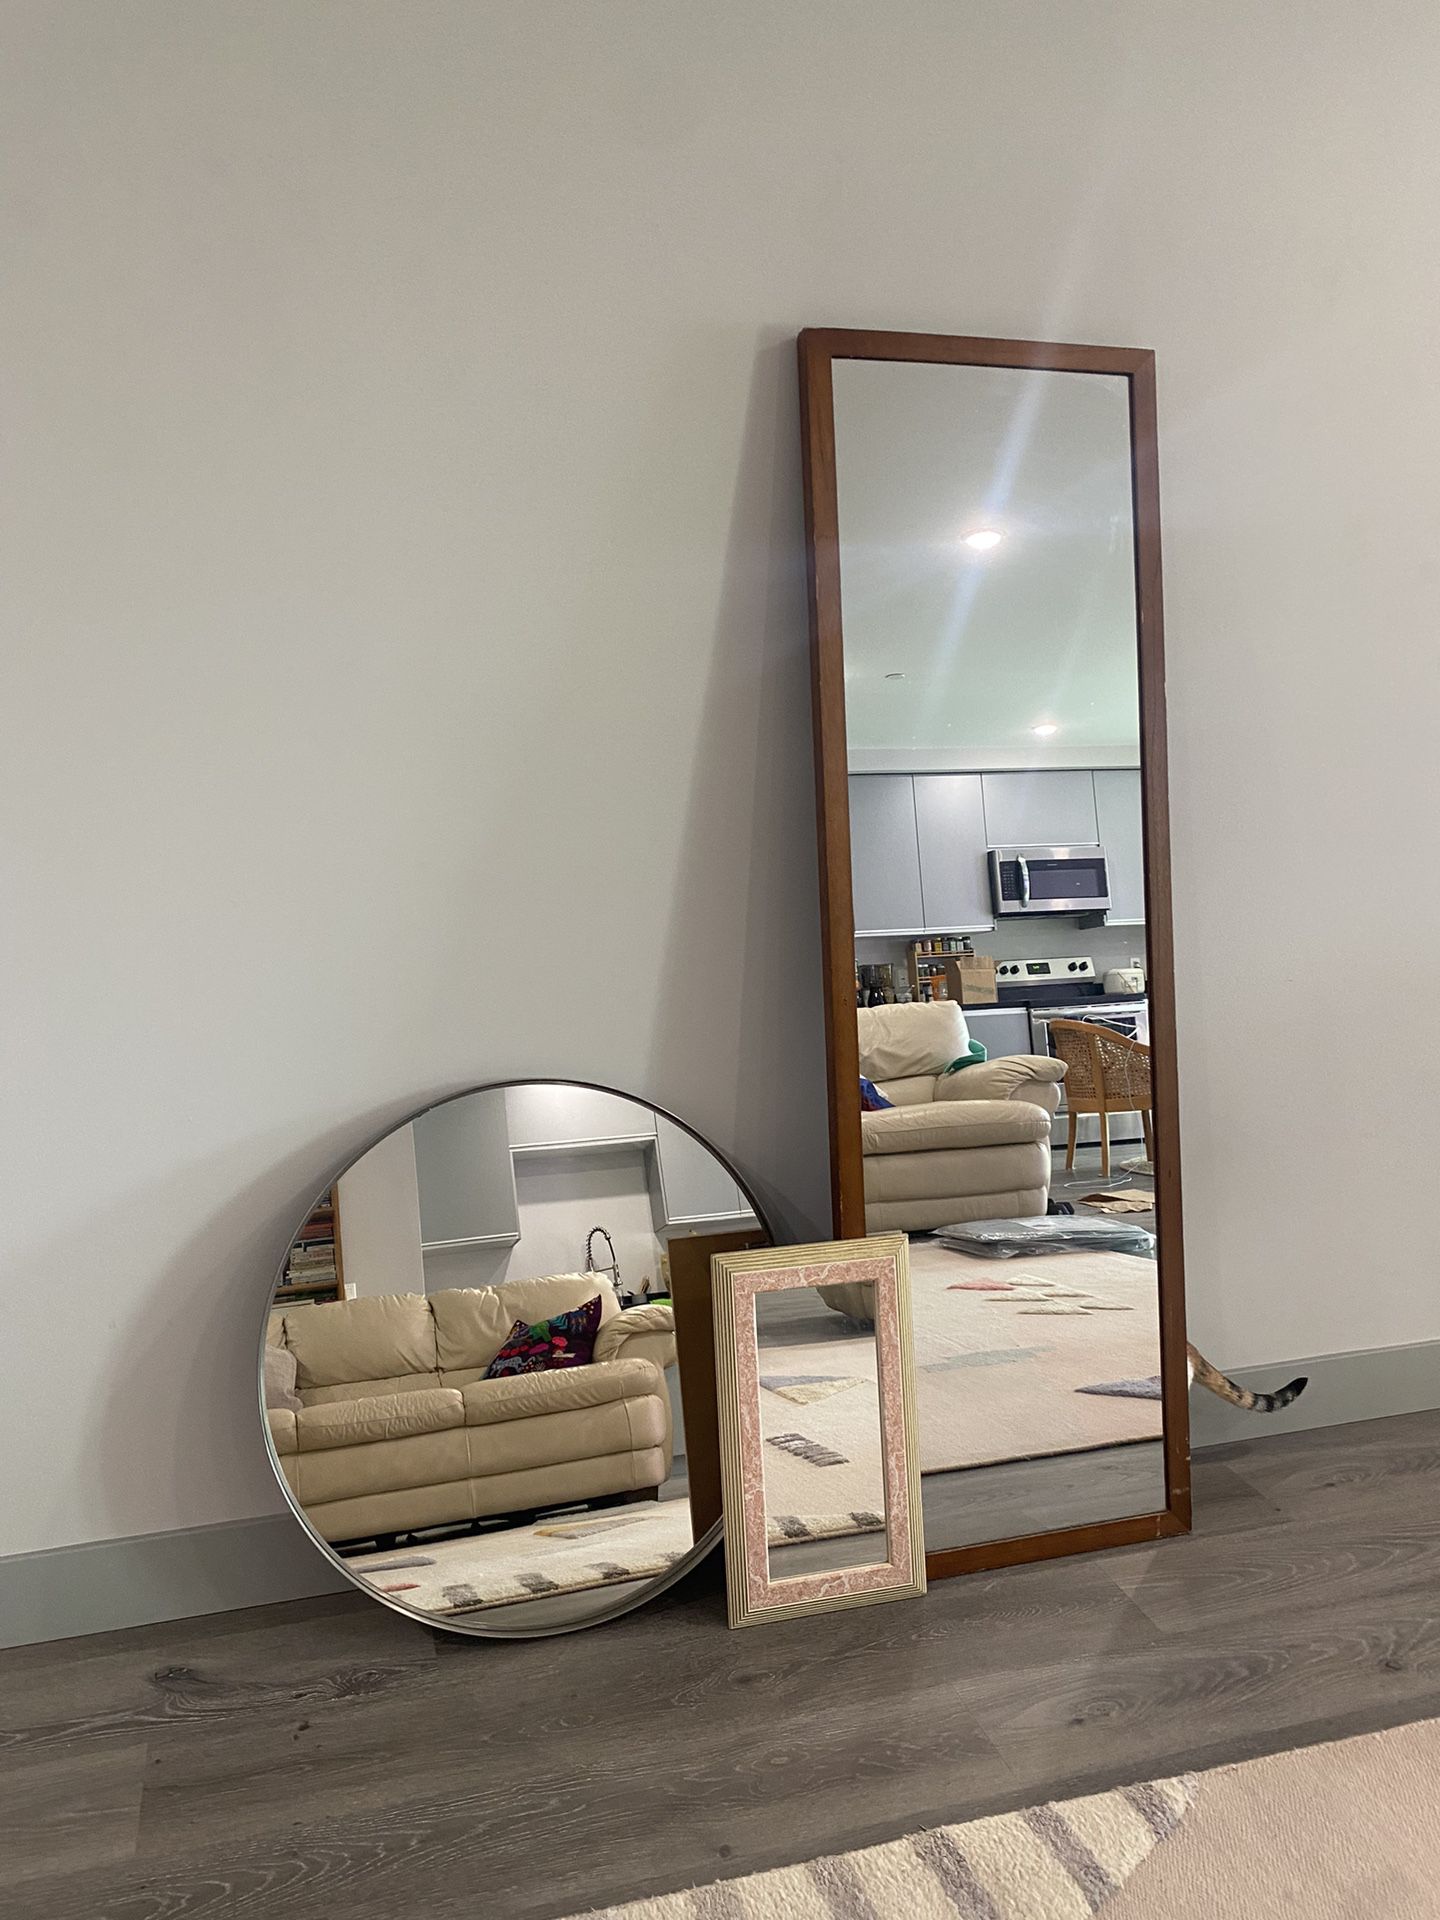 MUST GO BY SUN 5/26 • 3 mirrors - tall Standing brown wood, heavy metal circle ikea, 90s postmodern pink marble rectangle Vintage